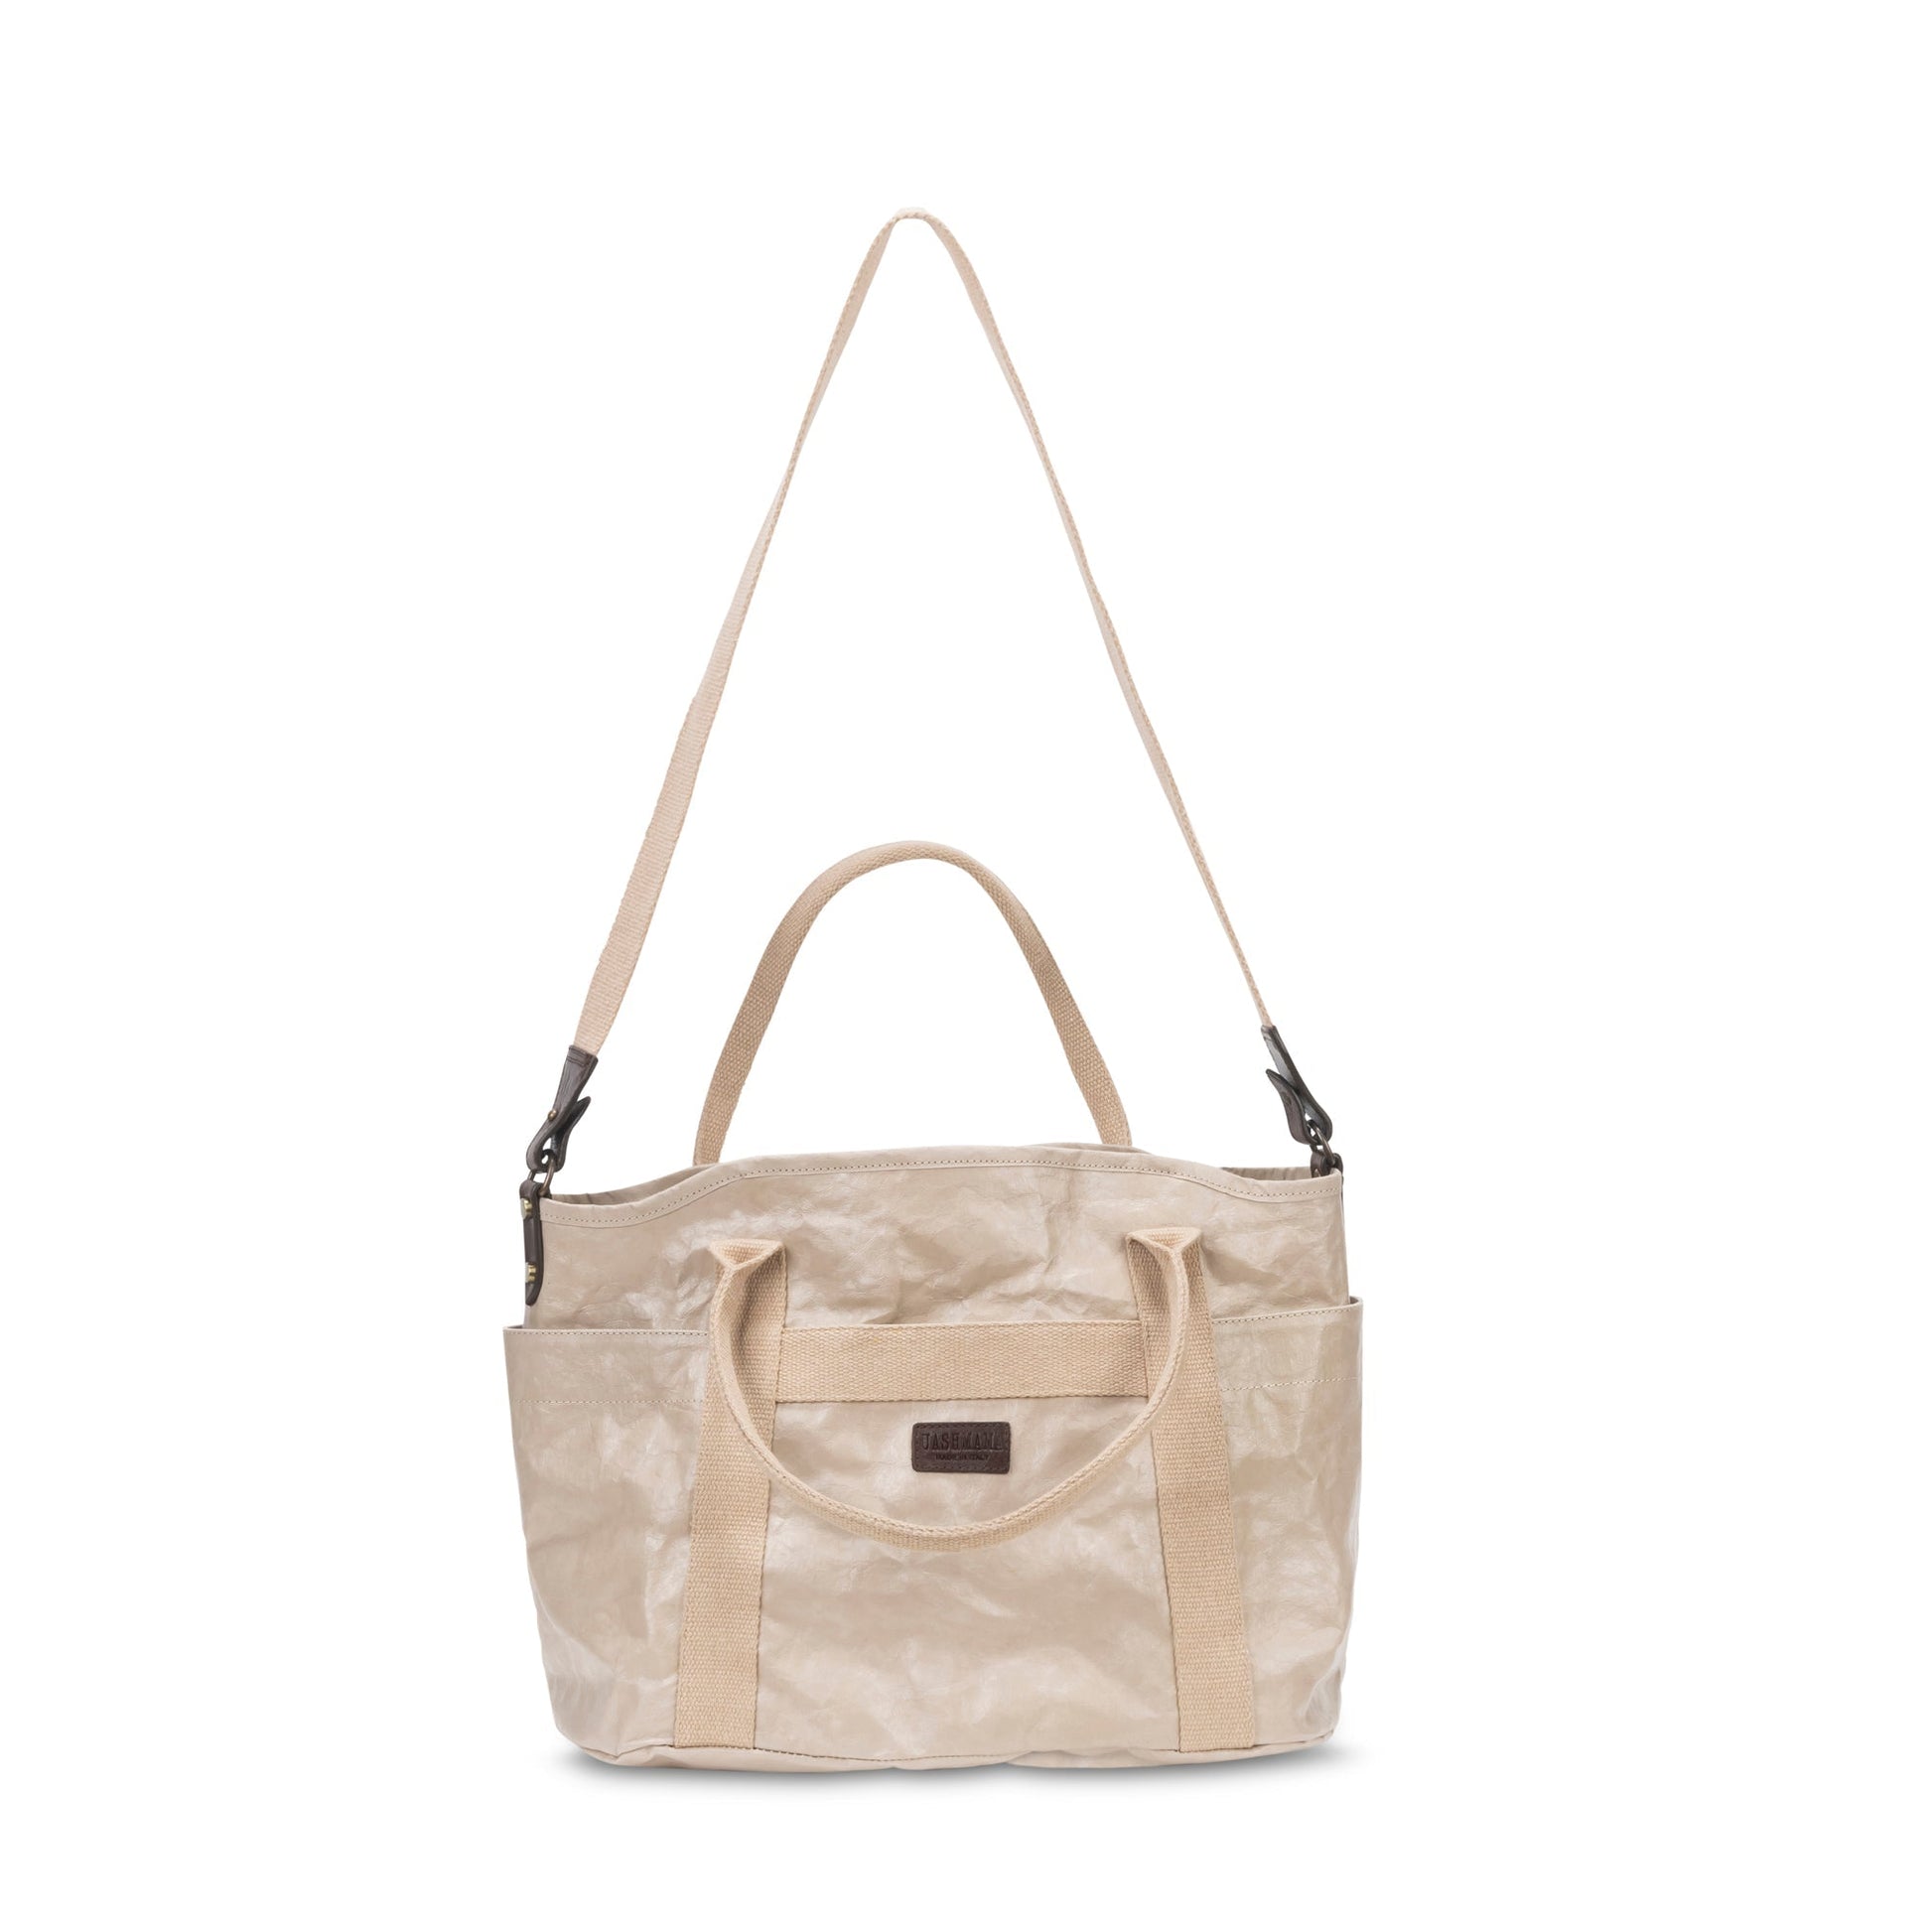 A large washable paper shopper bag is shown from a front angle. It features a long canvas shoulder strap and two top handles. It has an external pocket running the length of the bag, and the UASHMAMA logo stamped in the front. It is shown in a cream colour.